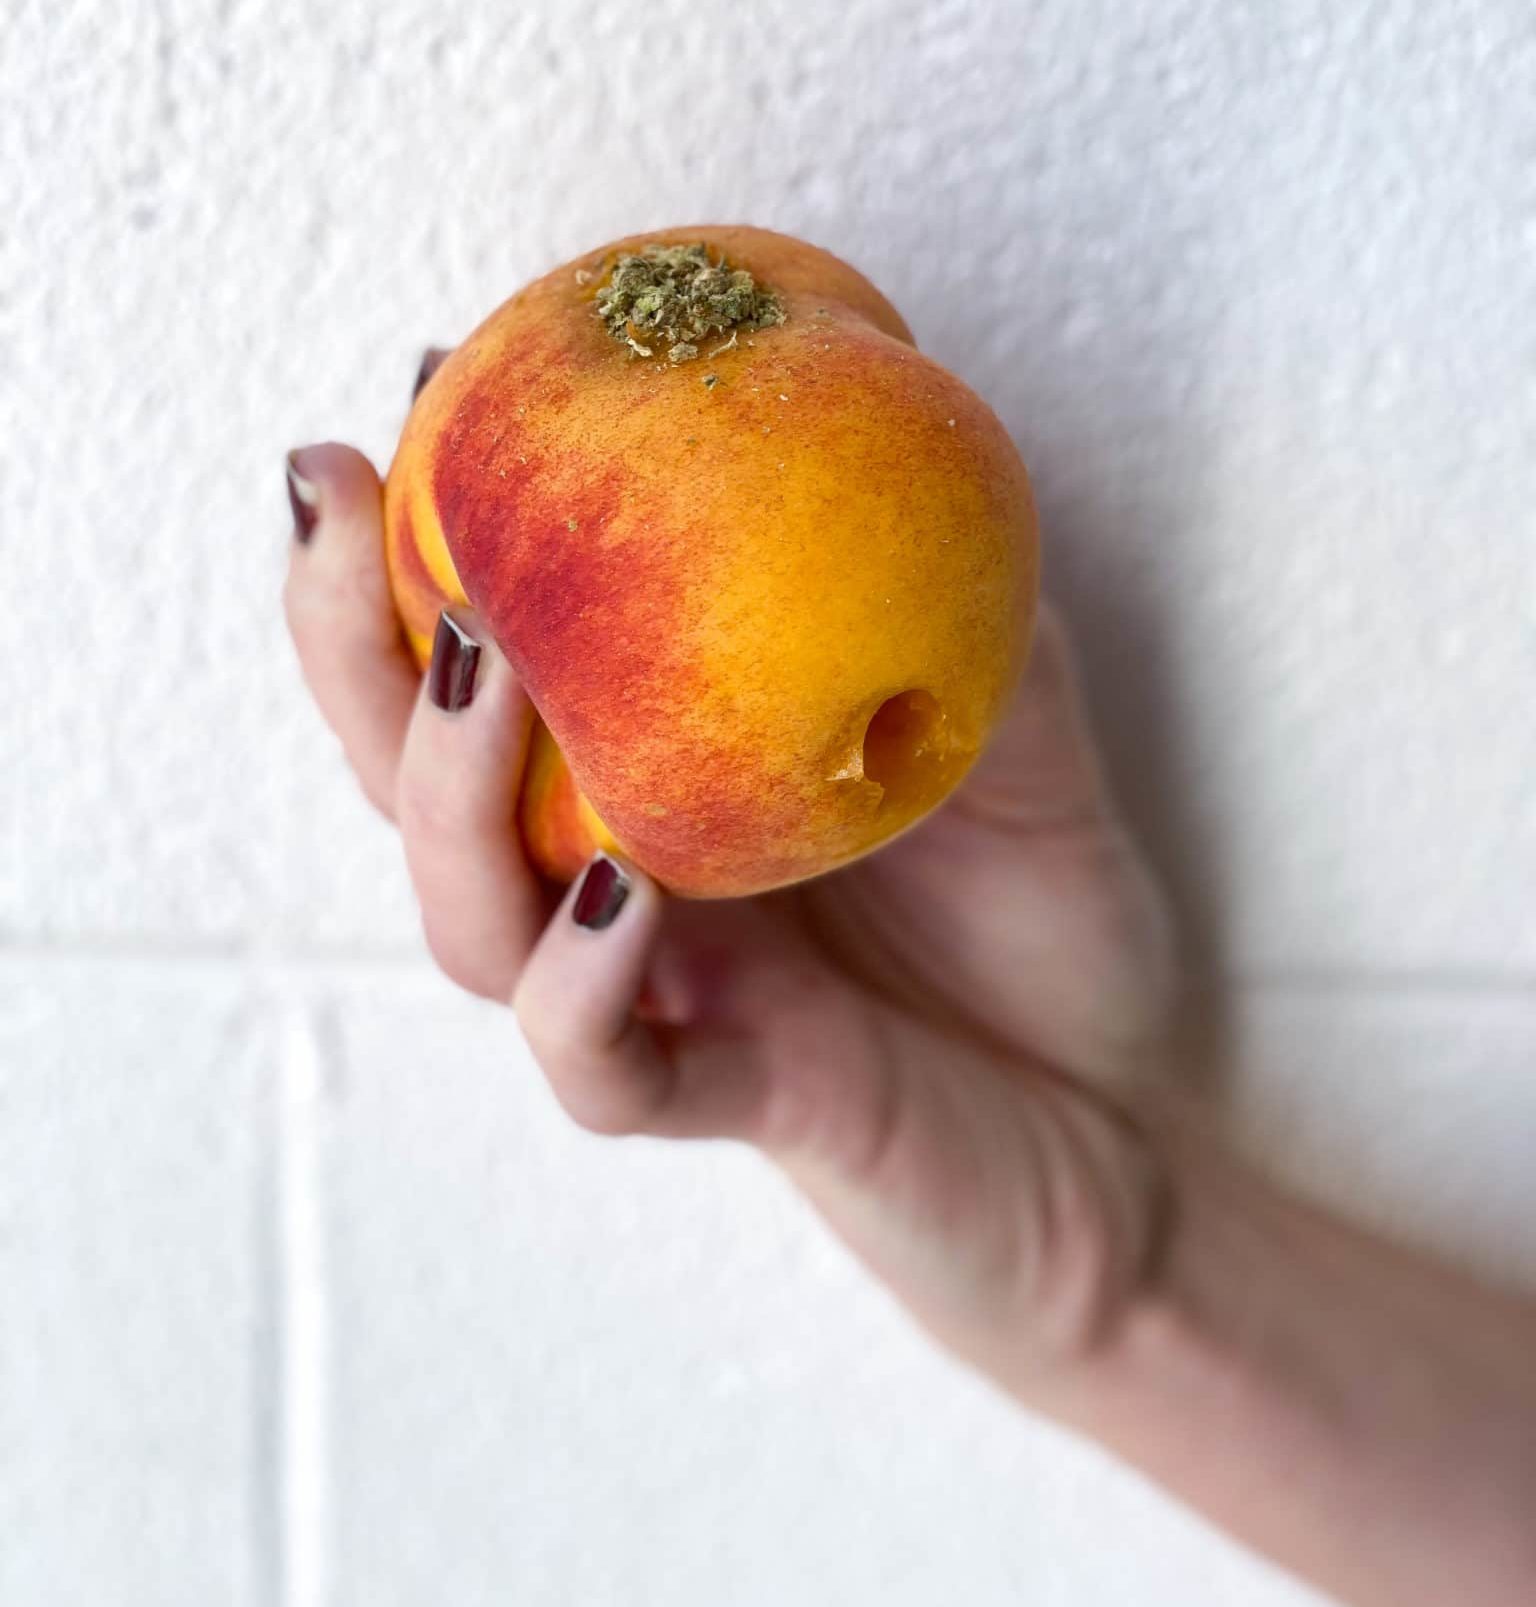 hand holding a DIY peach pipe with cannabis flower